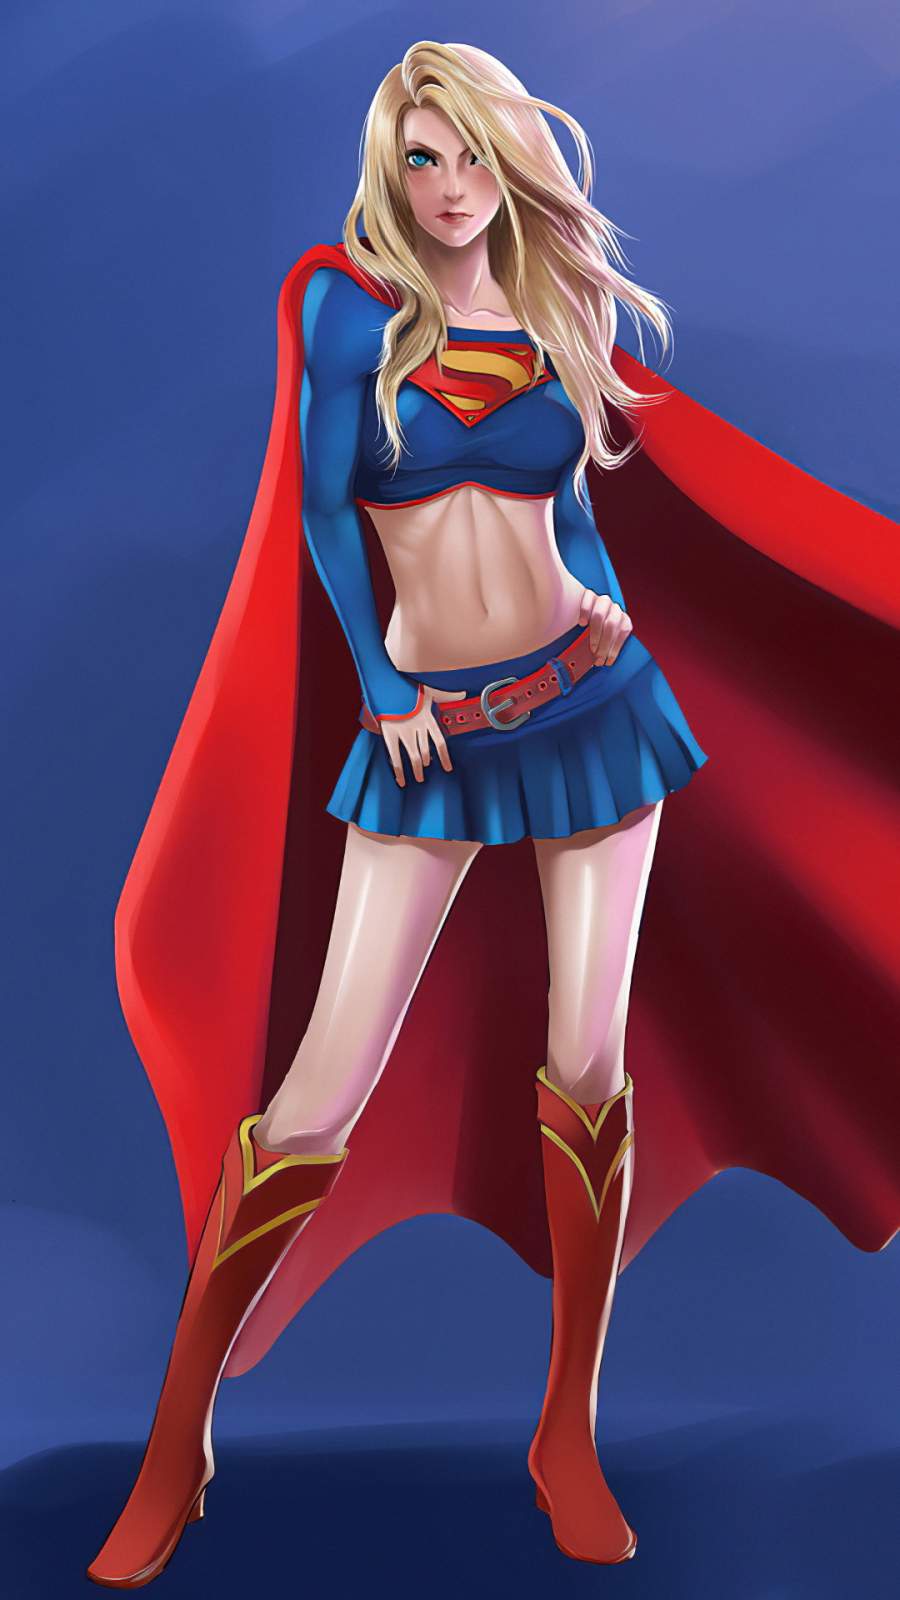 Sexy supergirl iphone wallpaper